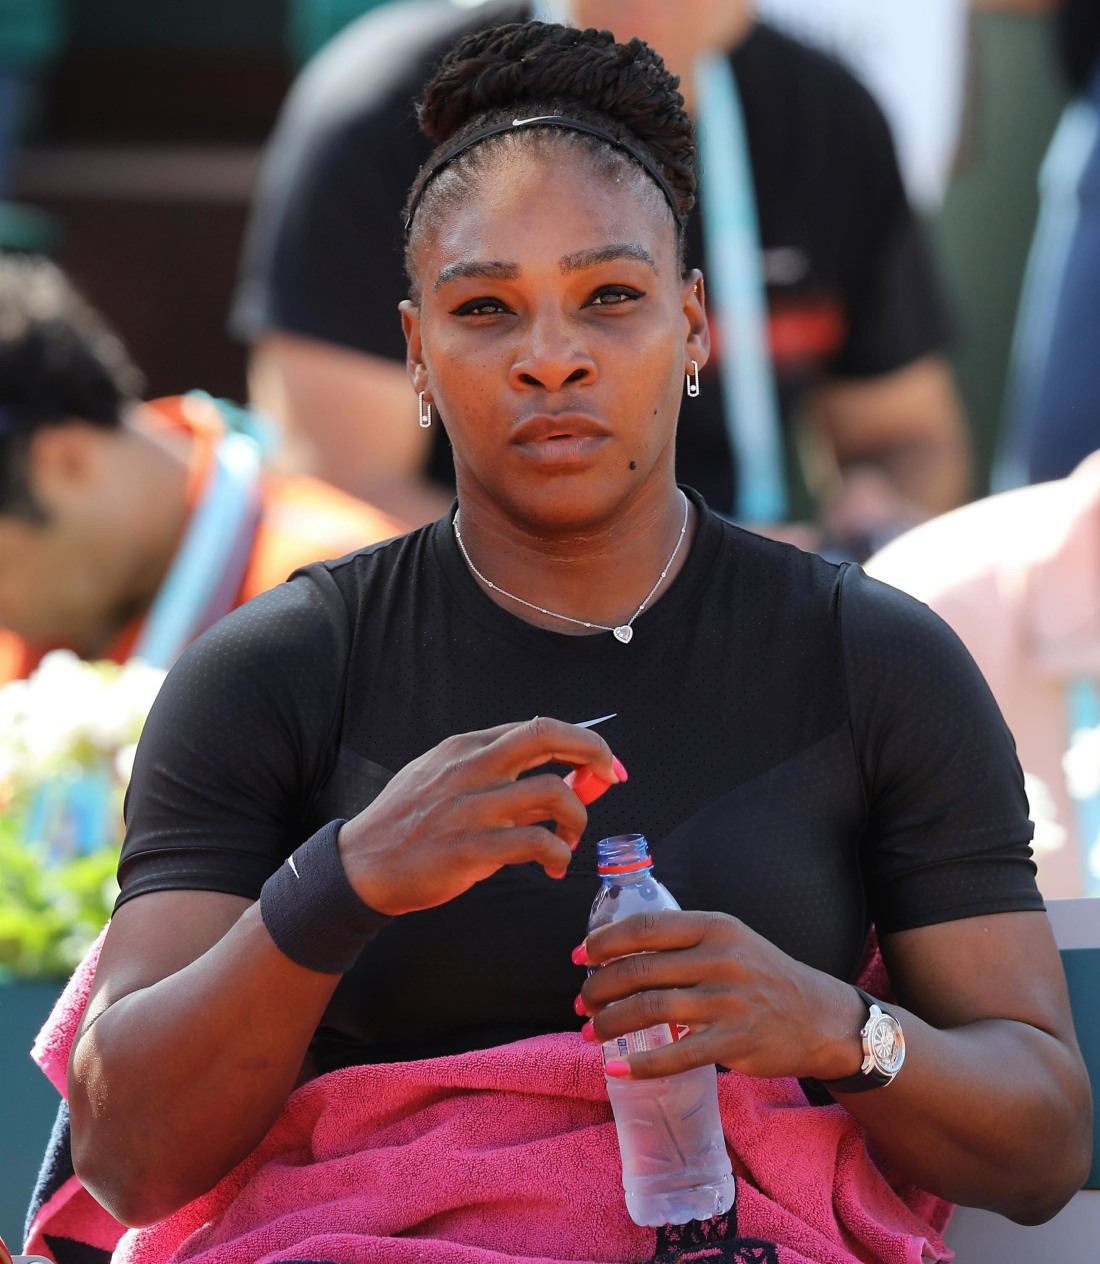 Serena Williams plays in the 2018 French Open